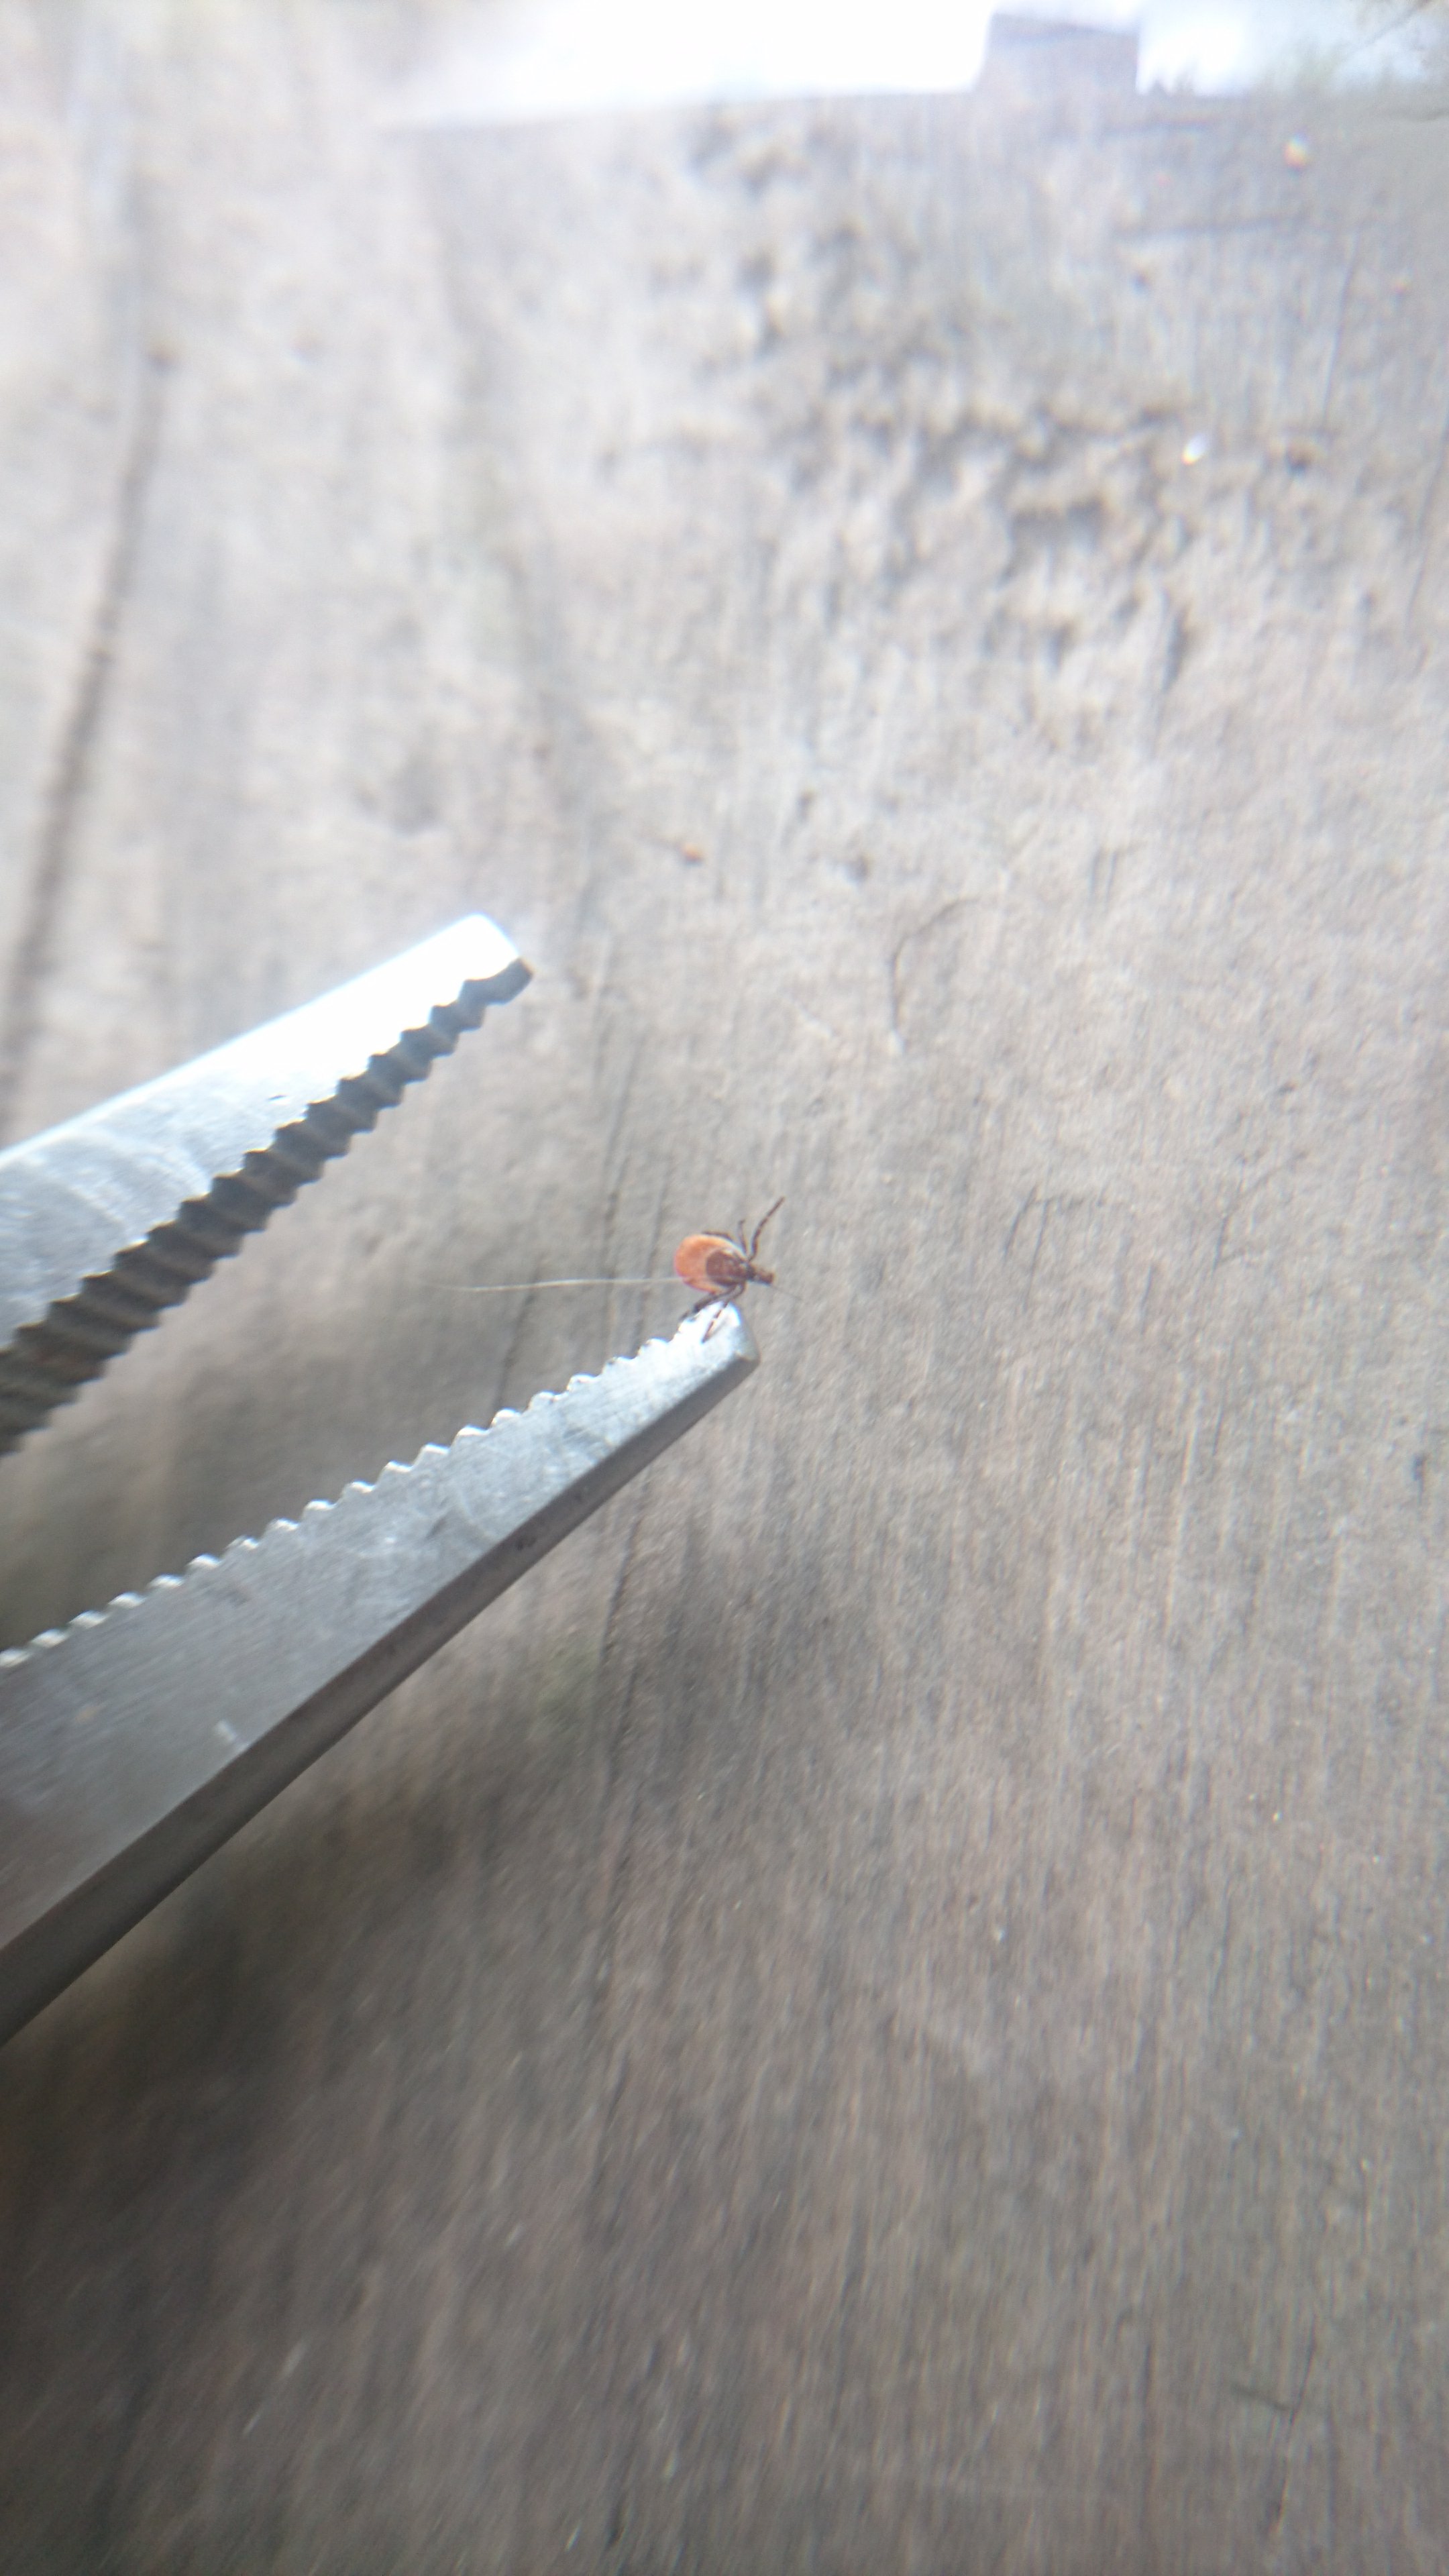 tick, head intact on the end of pliers